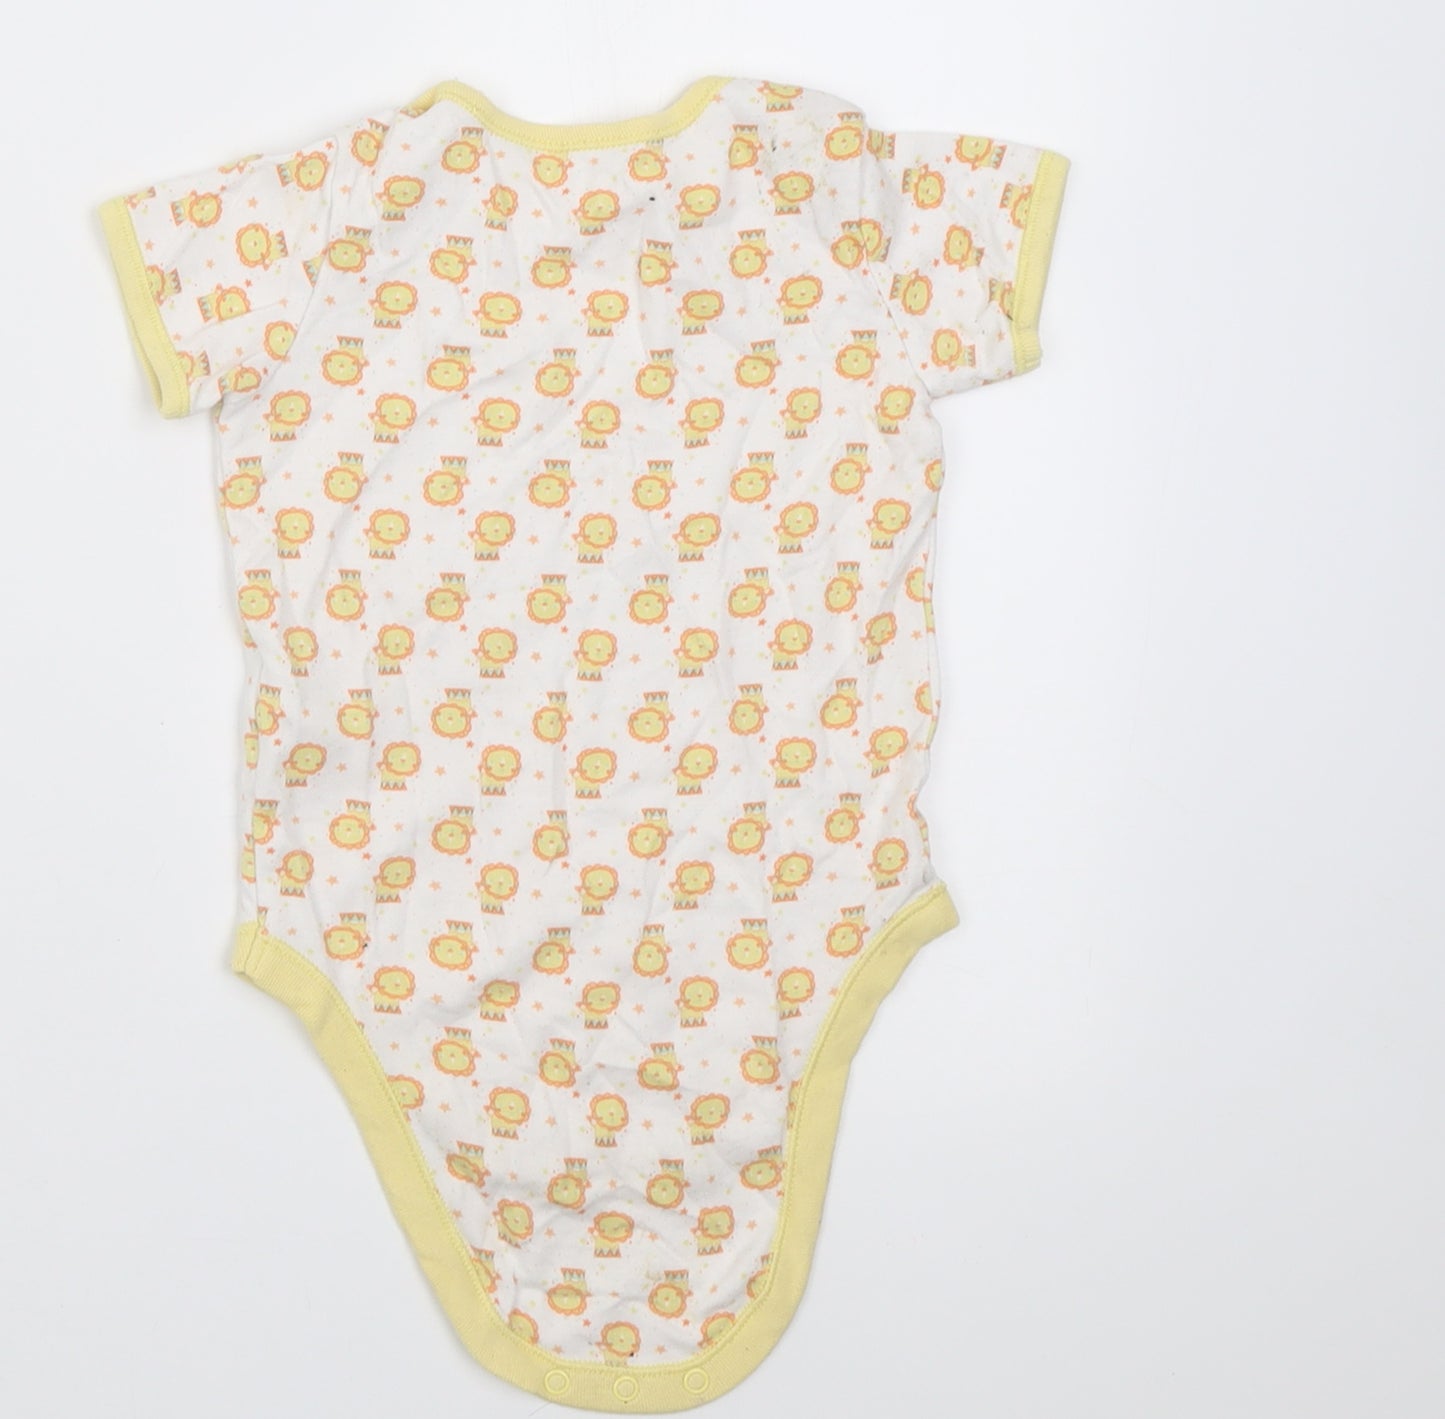 F&F Baby Yellow Geometric Cotton Babygrow One-Piece Size 18-24 Months  Button